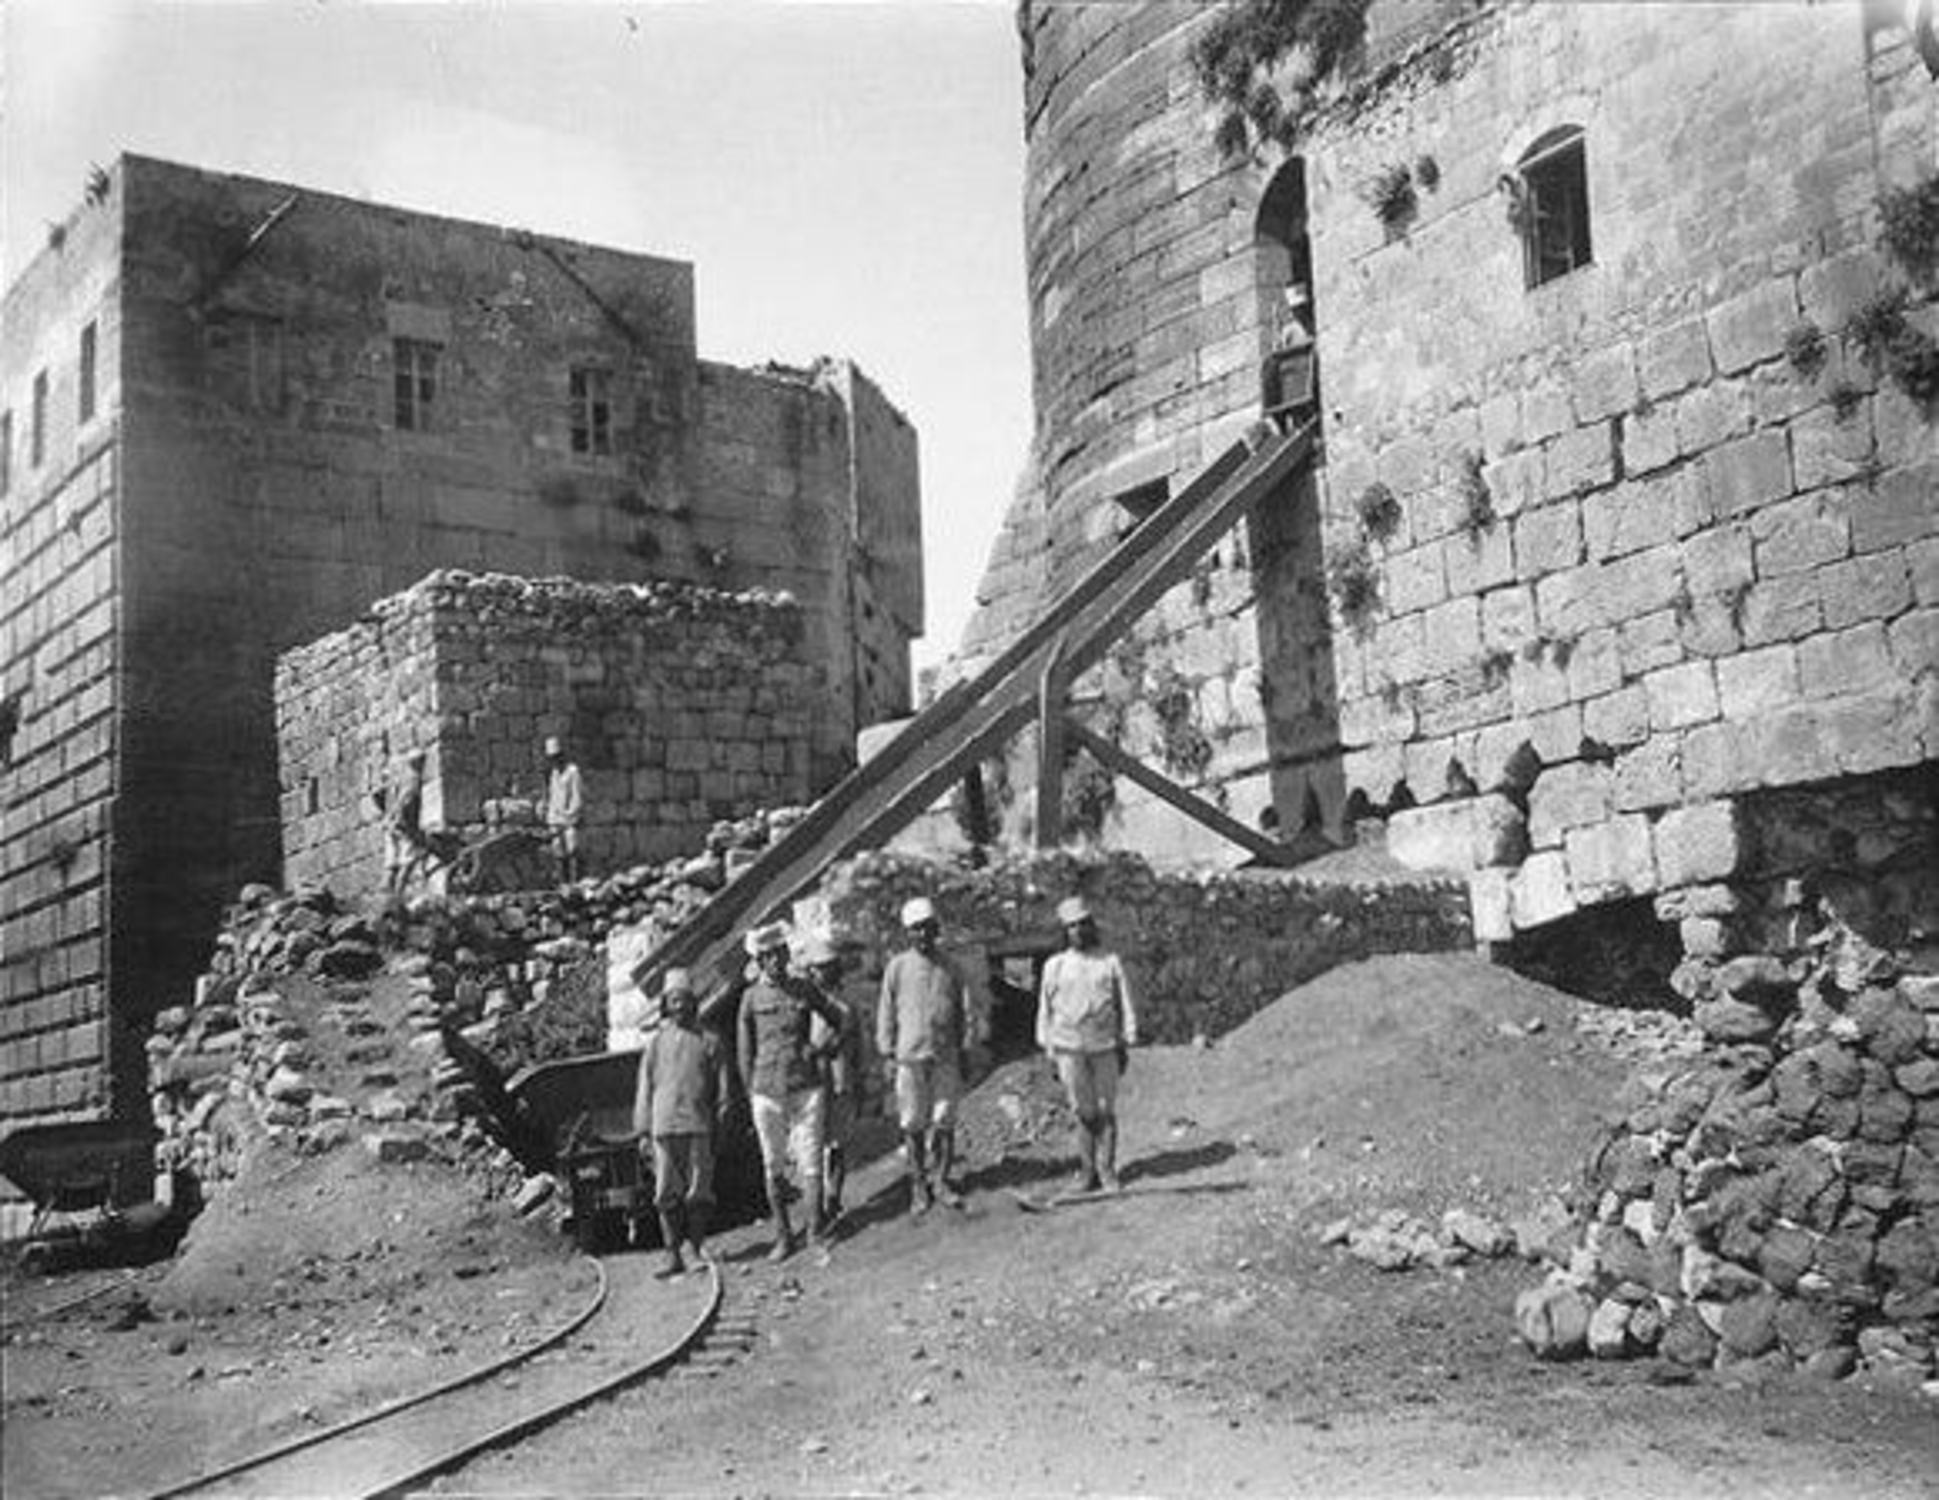 Photograph of excavations at the Krak des Chevaliers